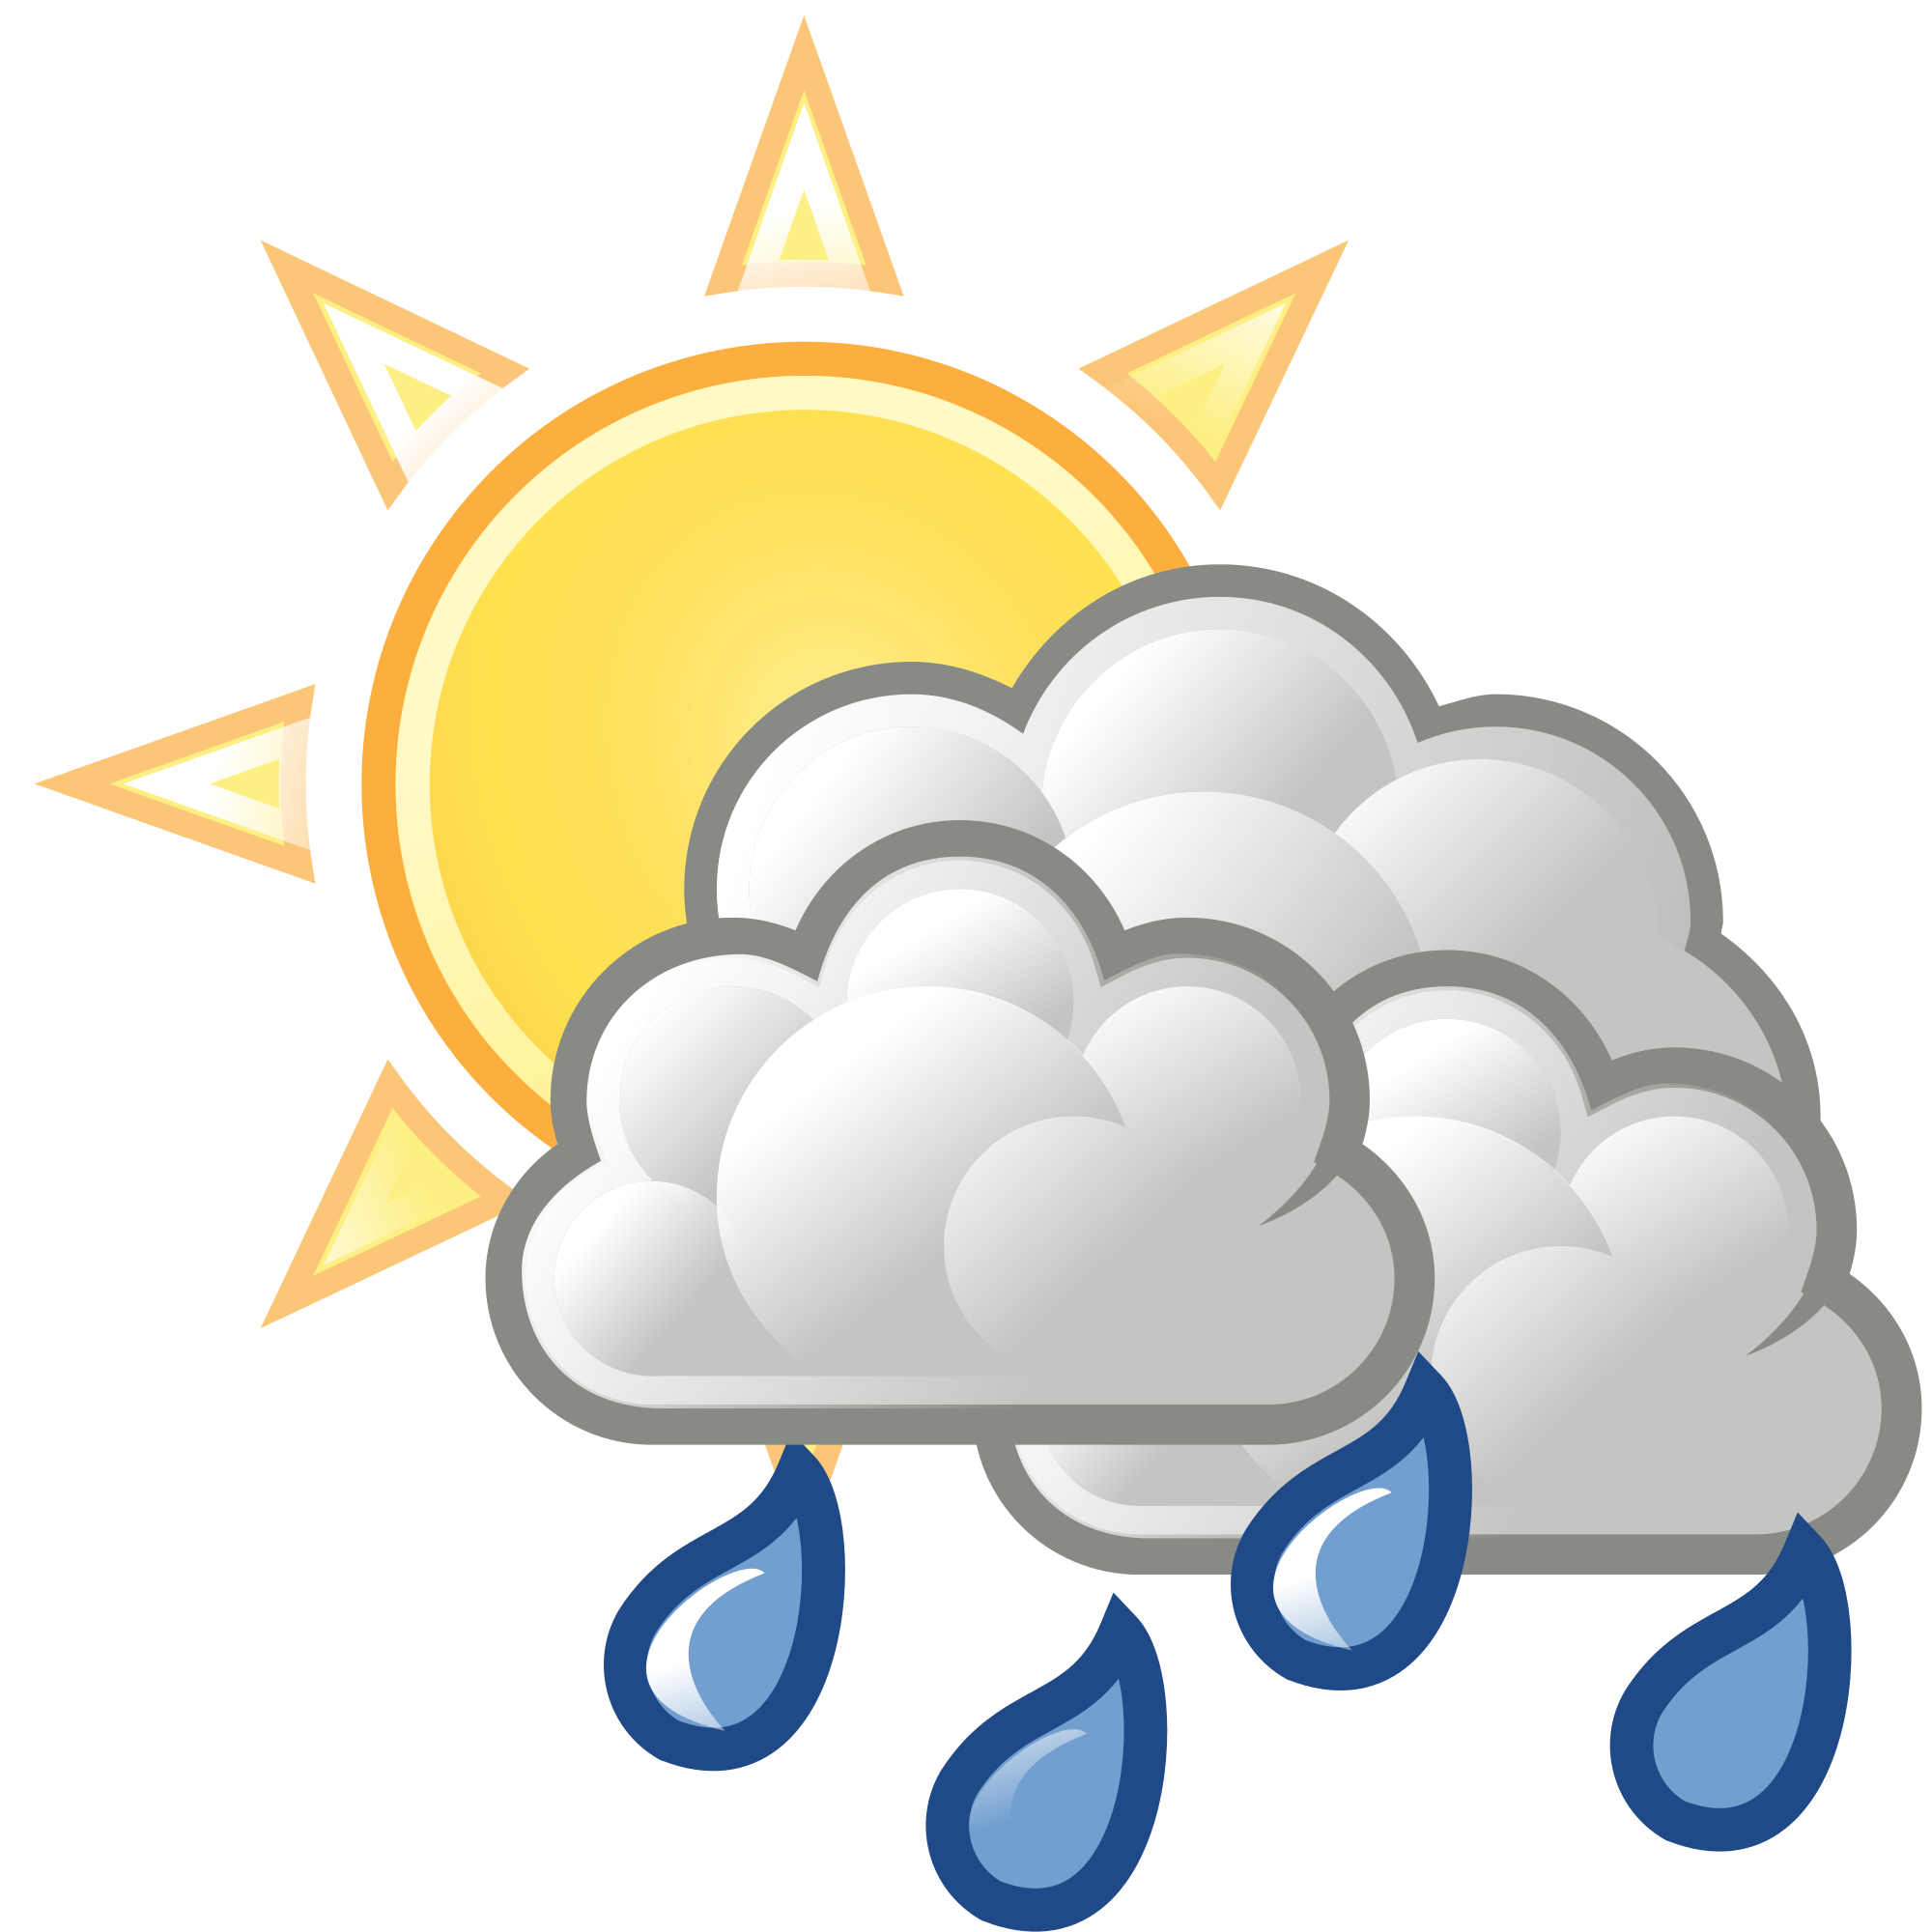 Rain Cloud Clipart Sun and other clipart images on Cliparts pub™